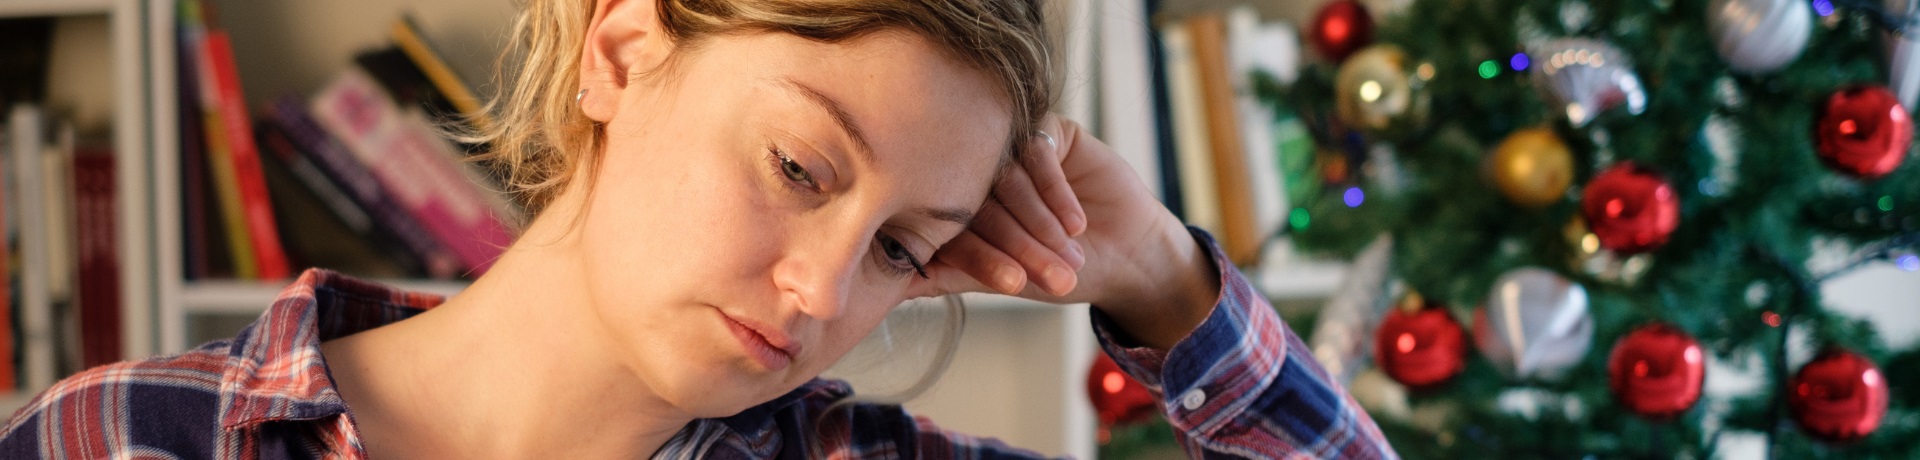 Loneliness How To Cope During The Holiday Season